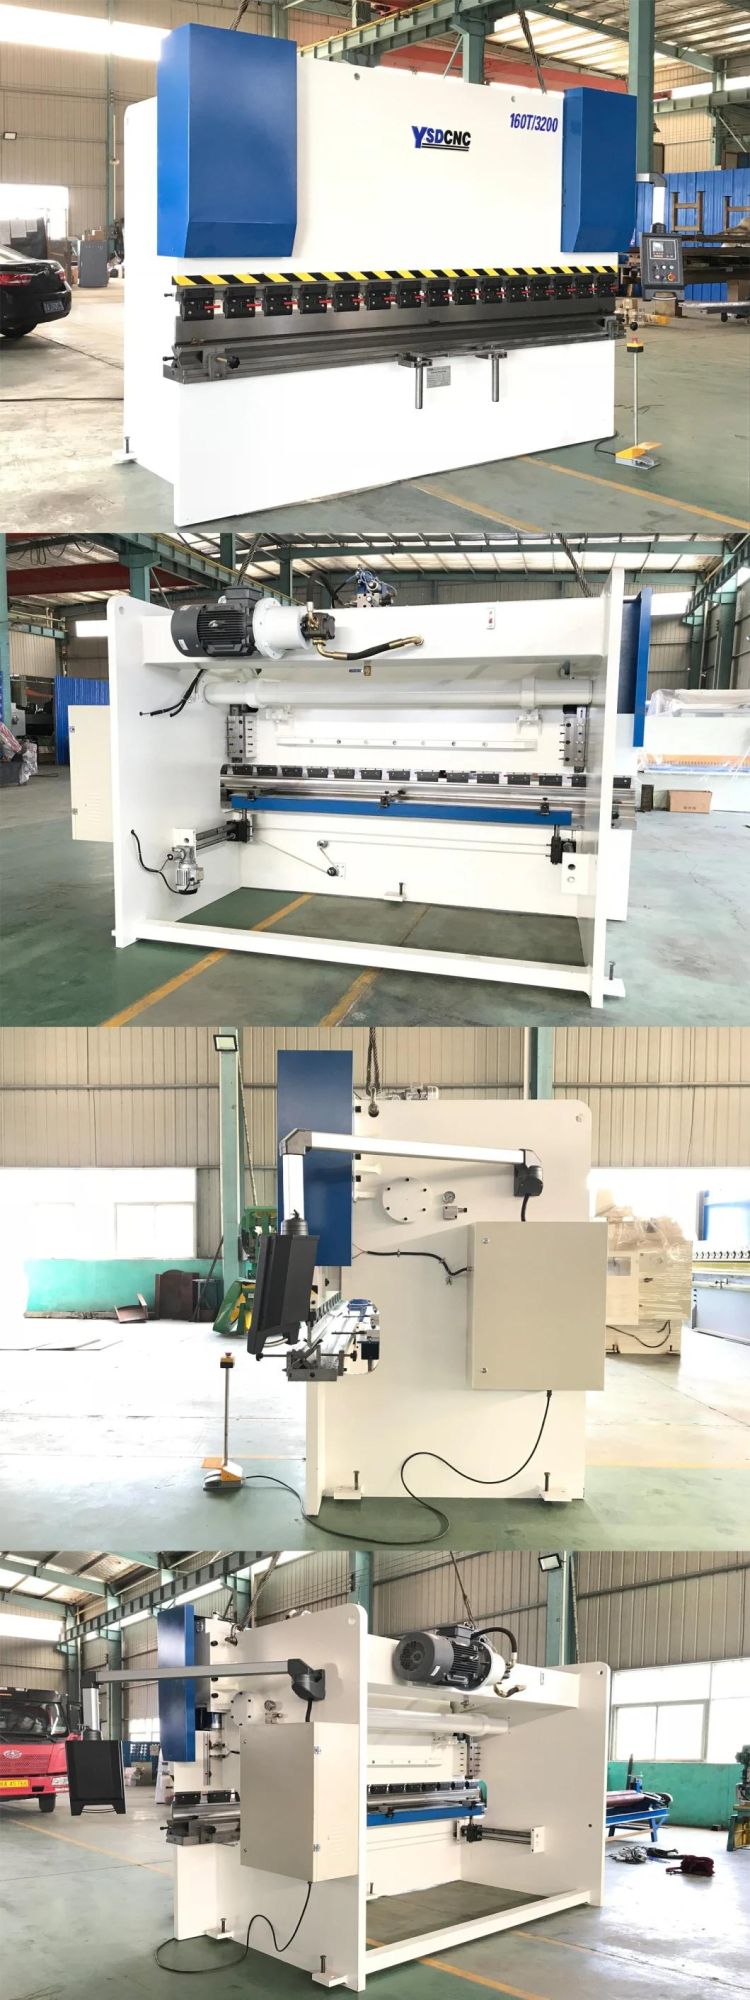 Sheet Metal Hydraulic Bending Machine with E21 Nc Control System